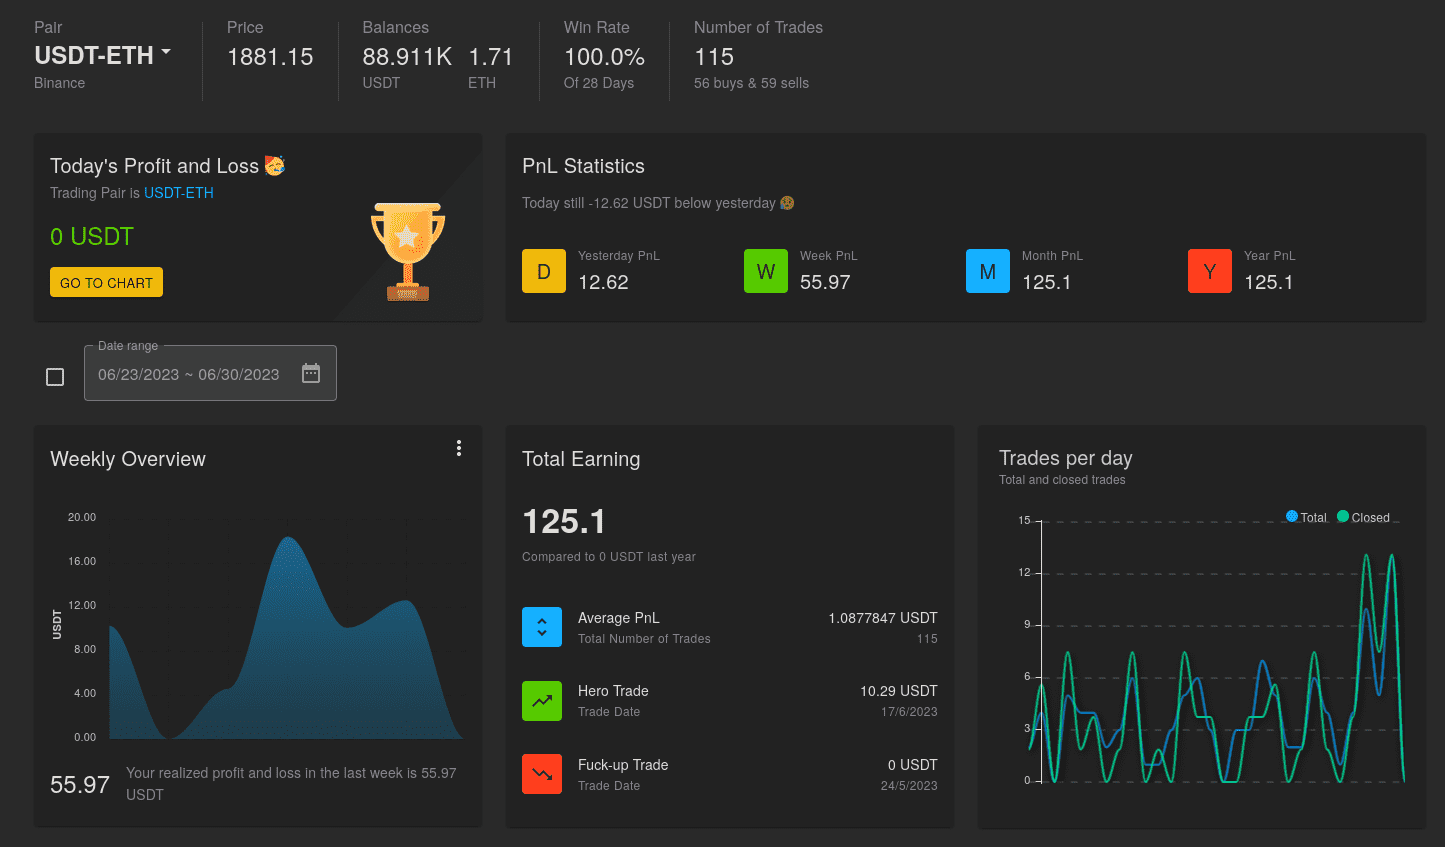 Detailed stats on the dashboard